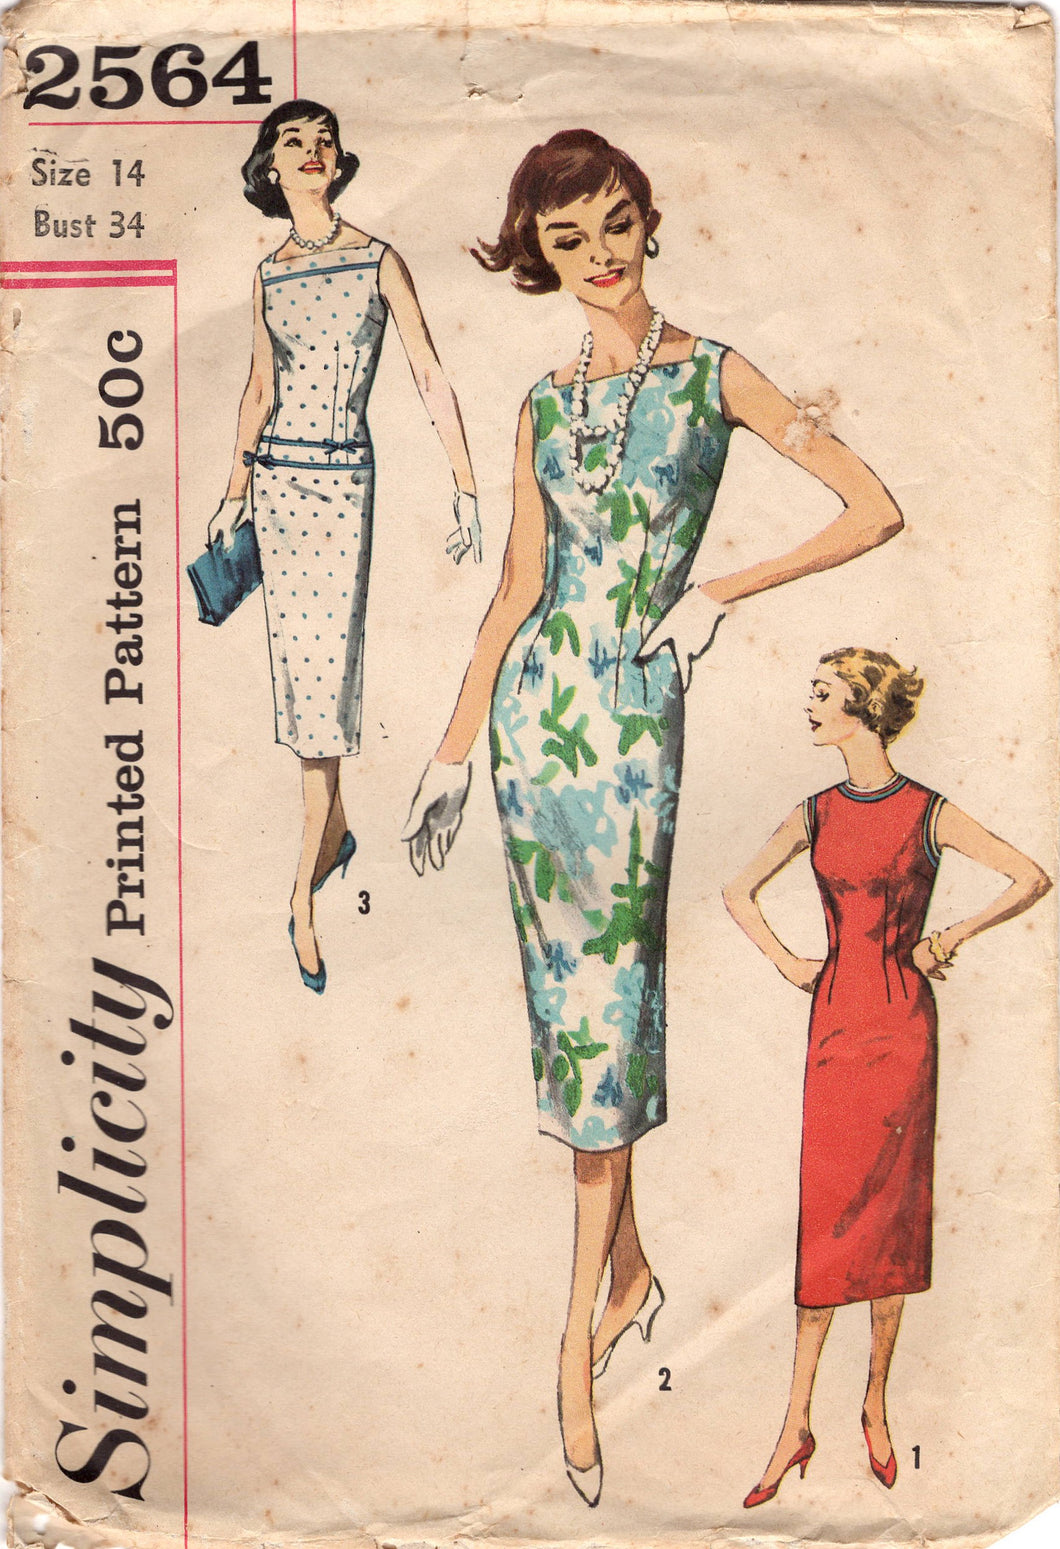 1960's Simplicity Sheath Dress with Square Boat Neckline Pattern - Bust 34